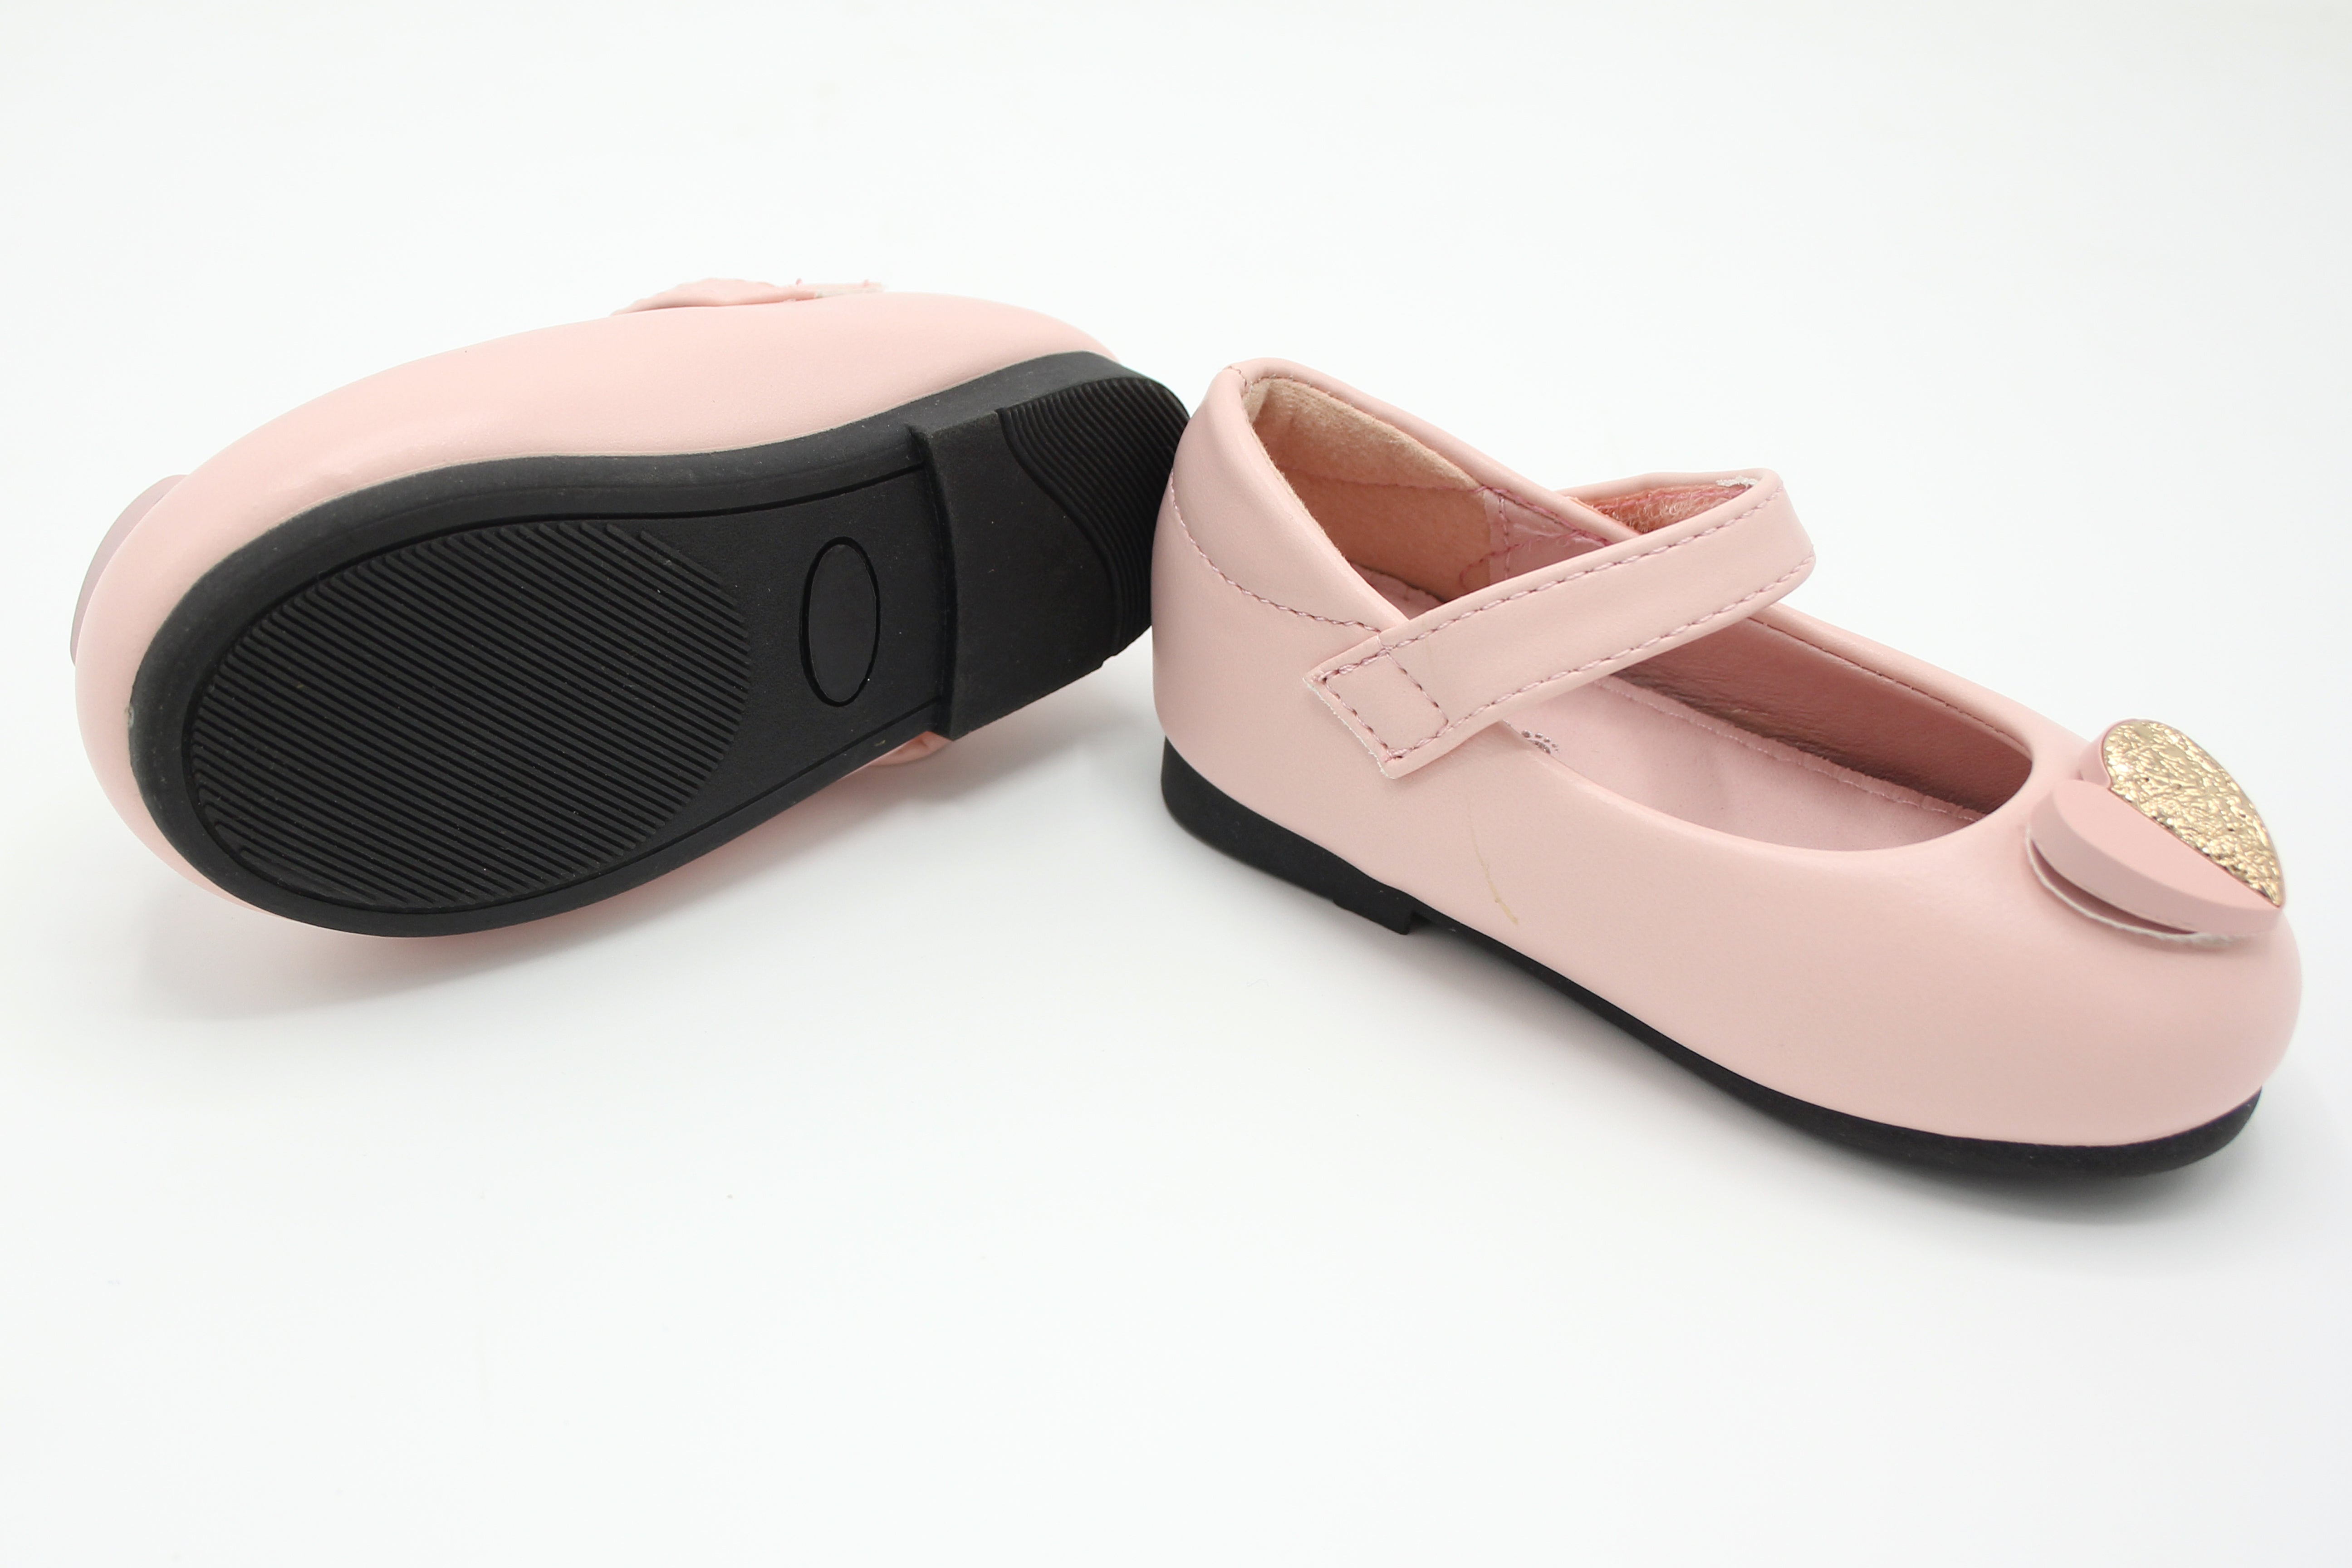 BABY GIRL SMALL PUMPS 20-25 - 30014